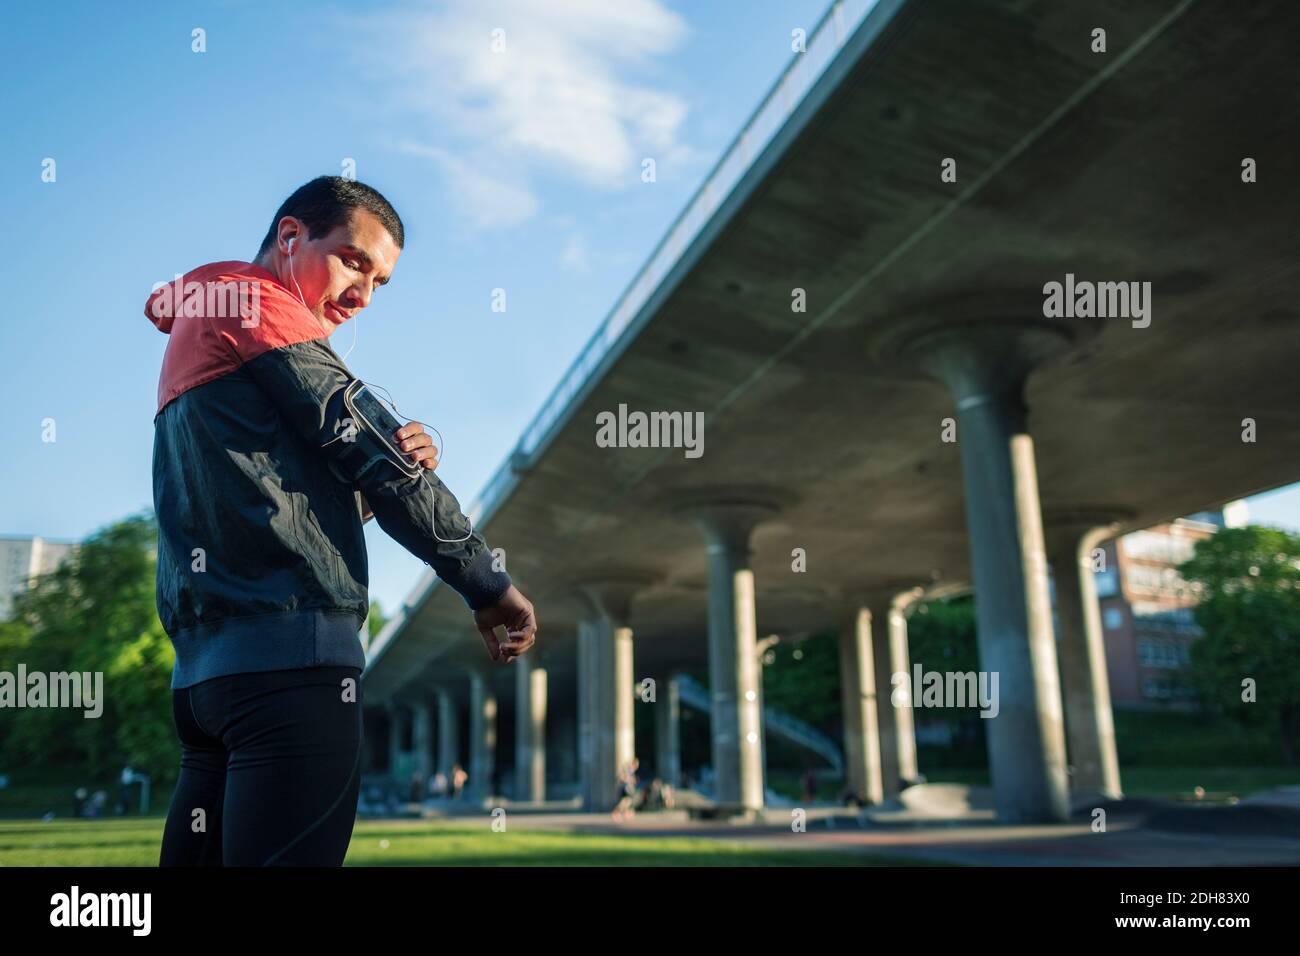 Low angle view of man touching arm band while standing against bridge Stock Photo